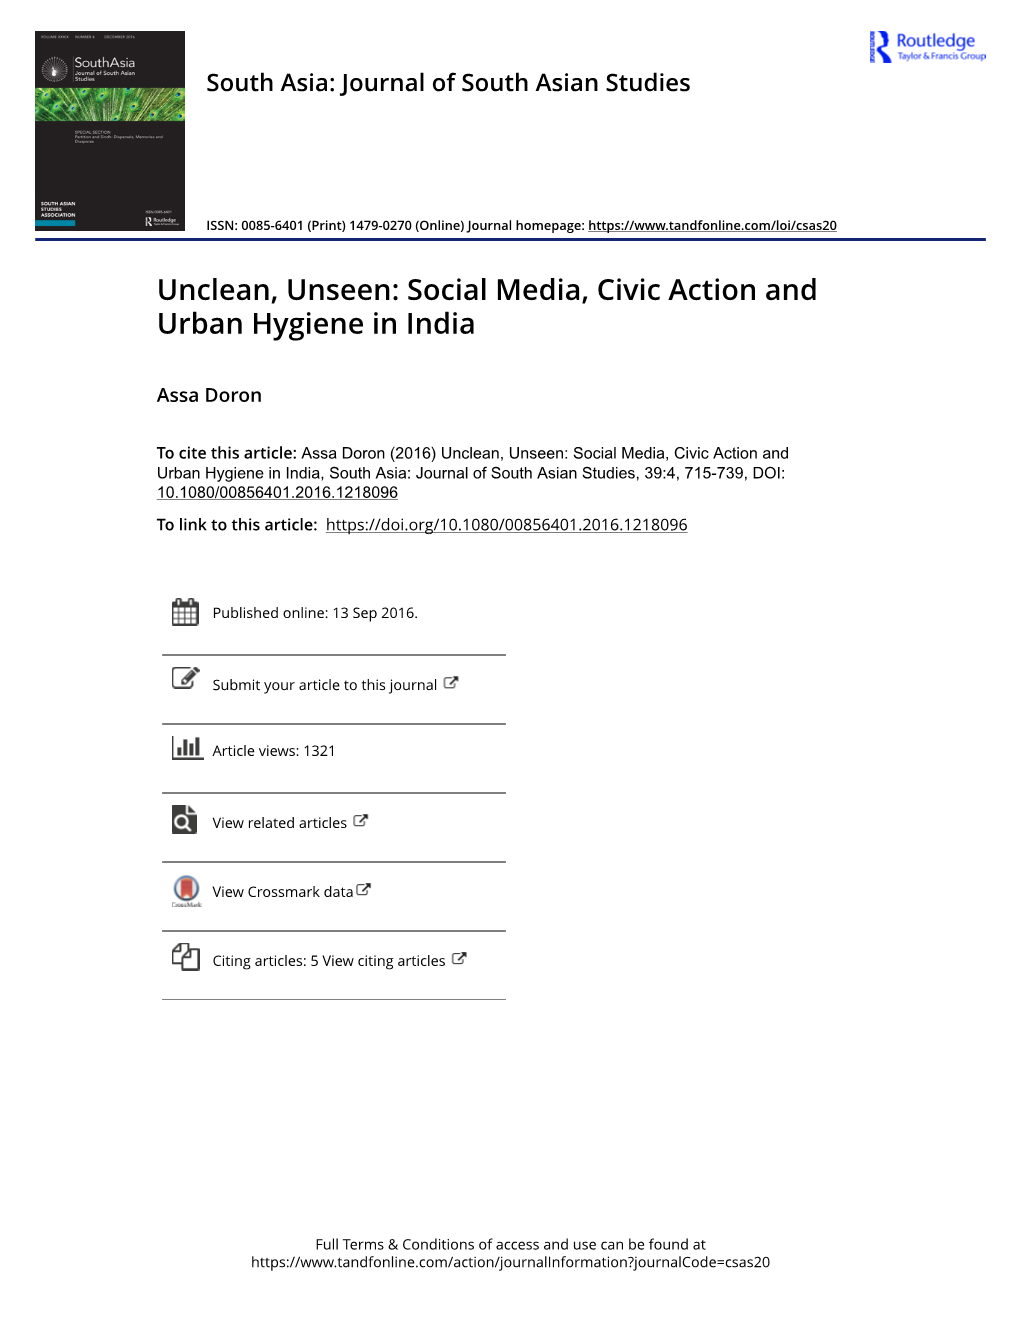 Social Media, Civic Action and Urban Hygiene in India